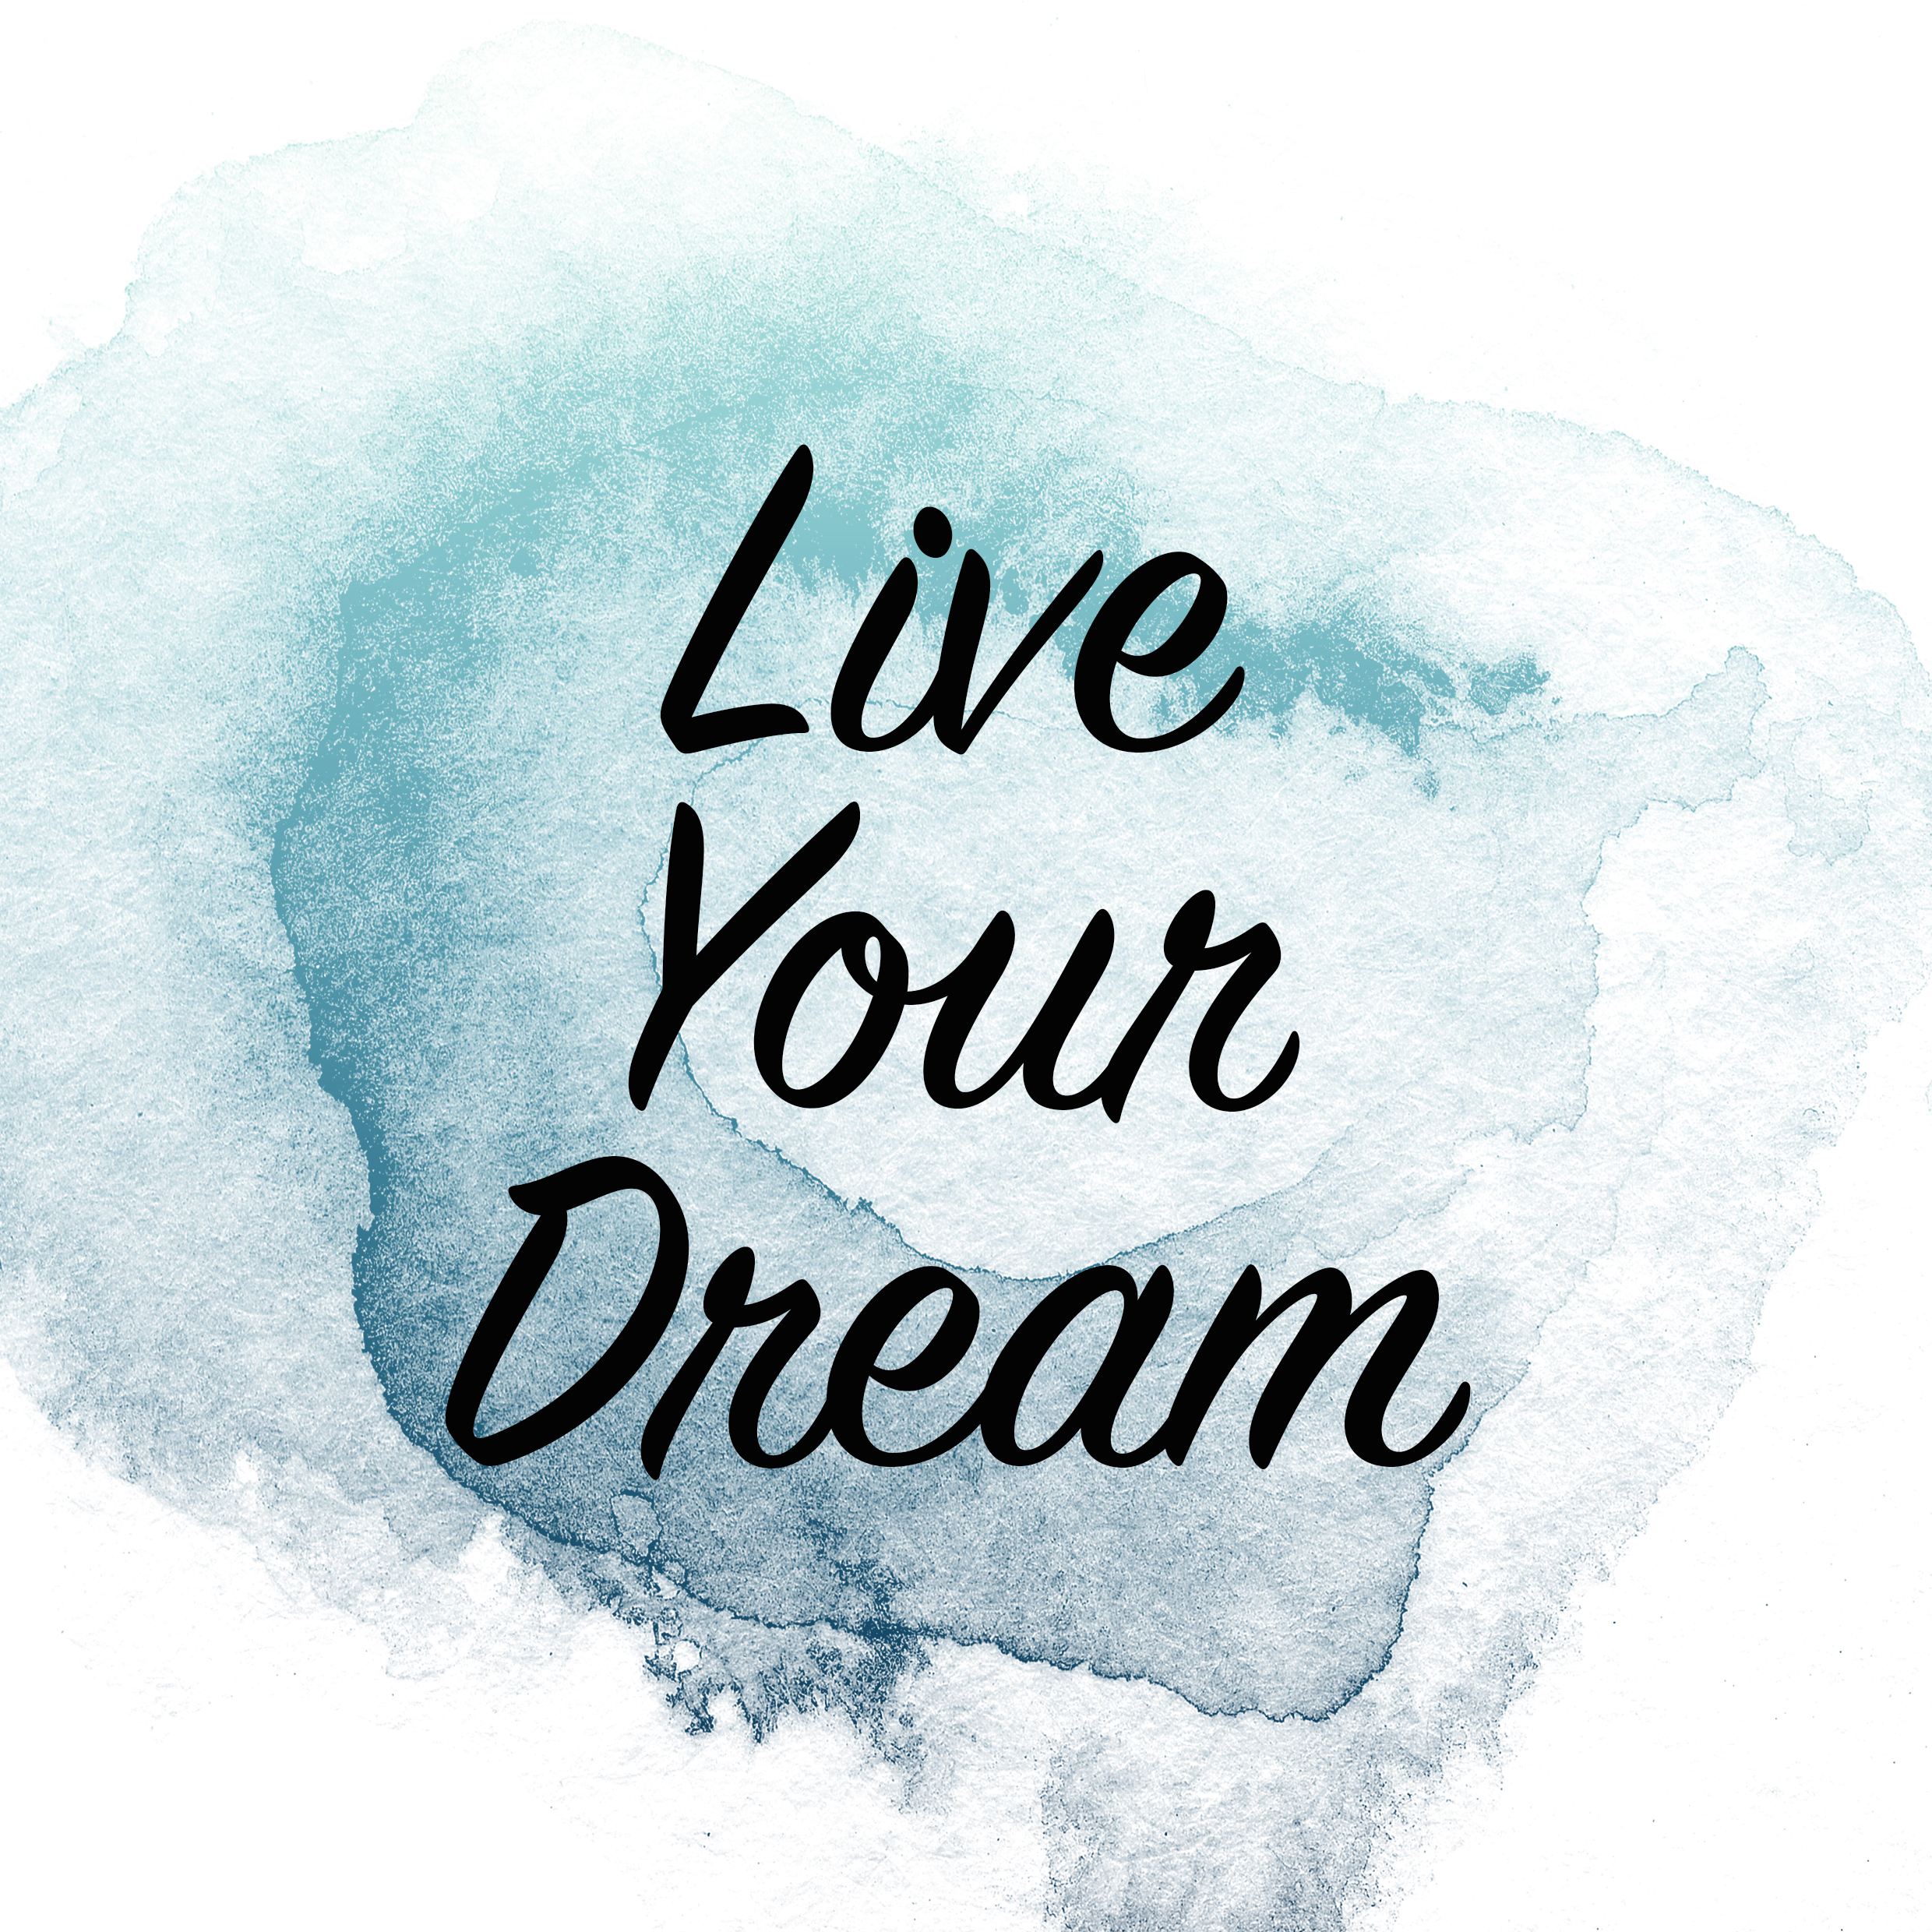 Inspirational motivating quote on watercolor brush background